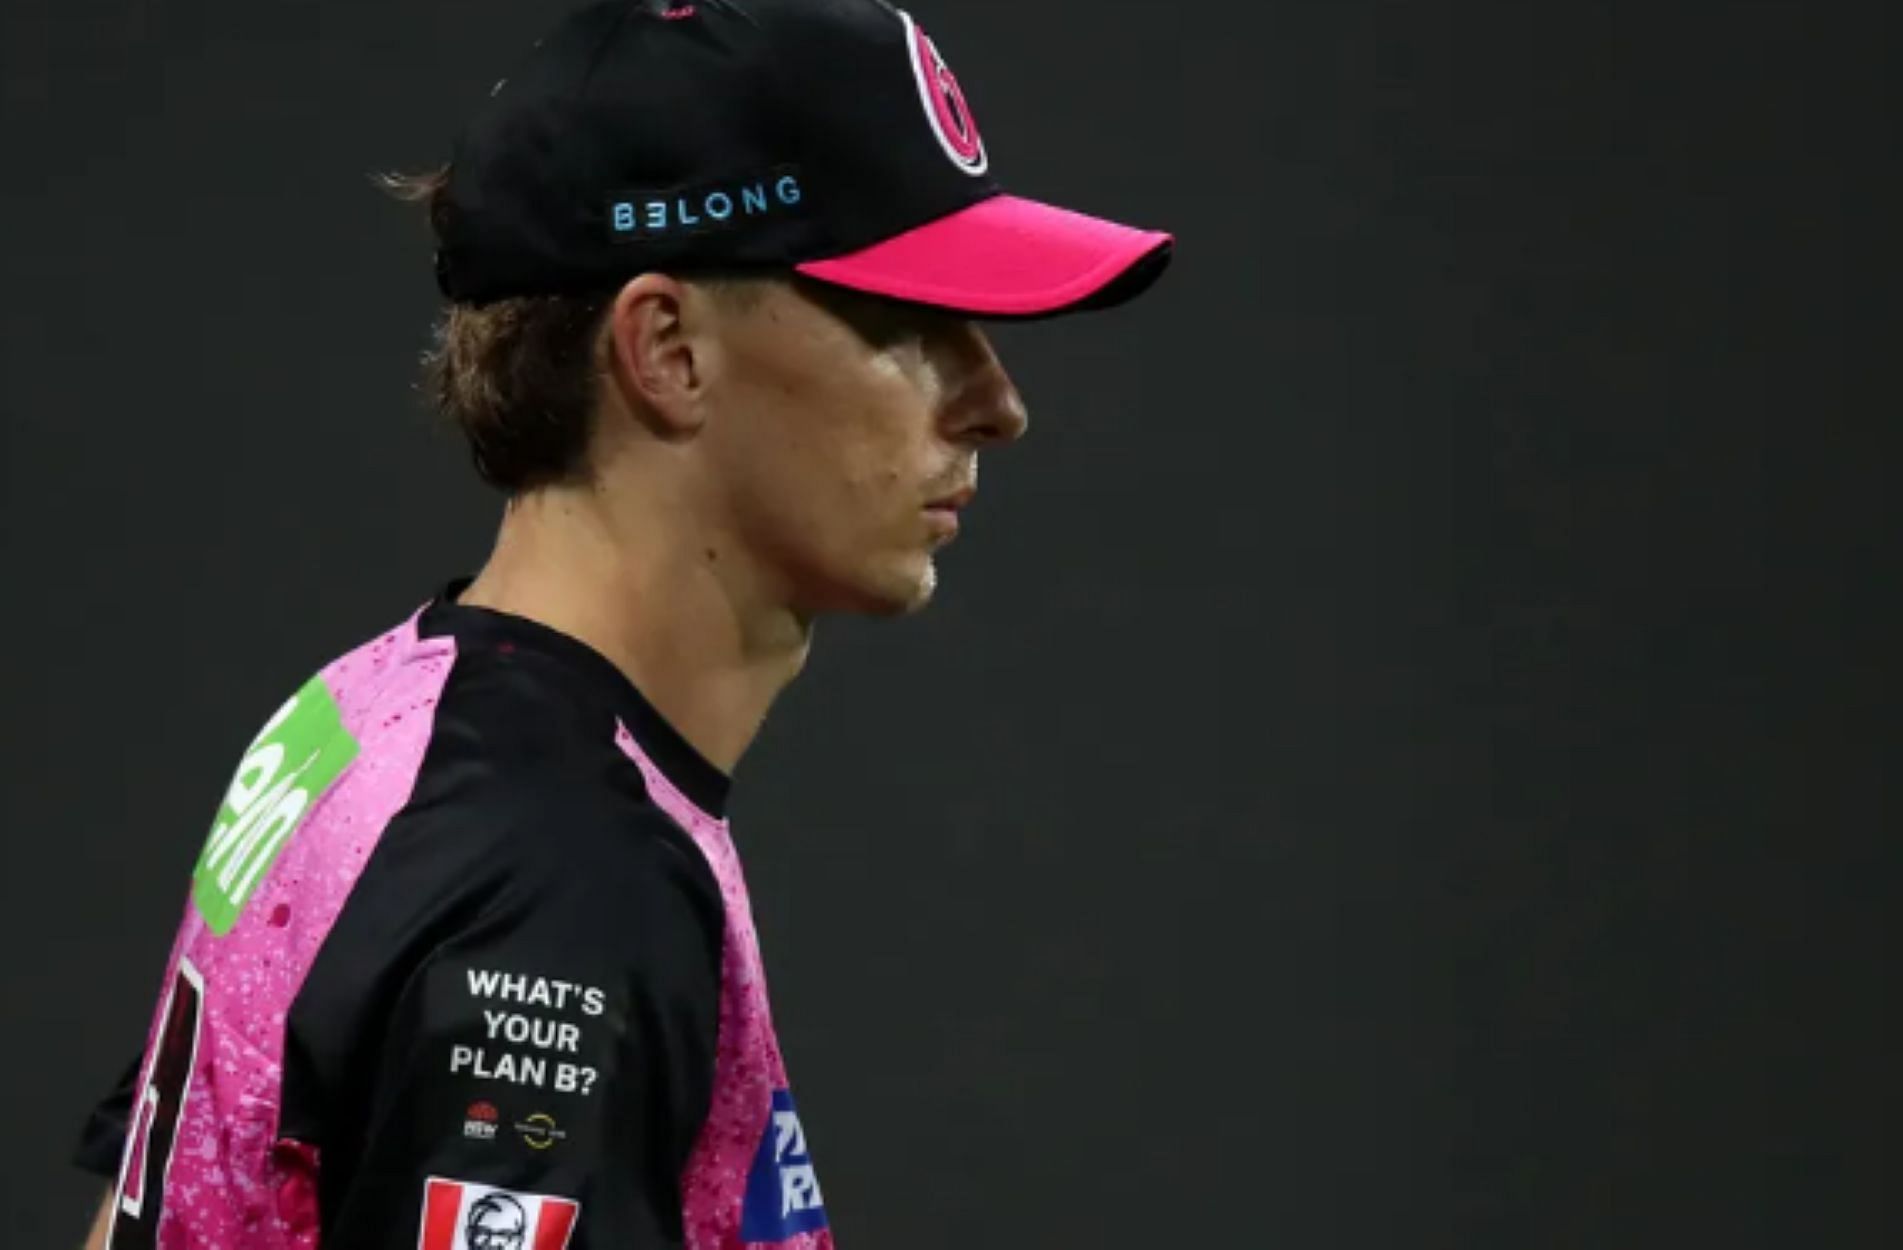 Curran has been an integral part of the Sydney Sixers.